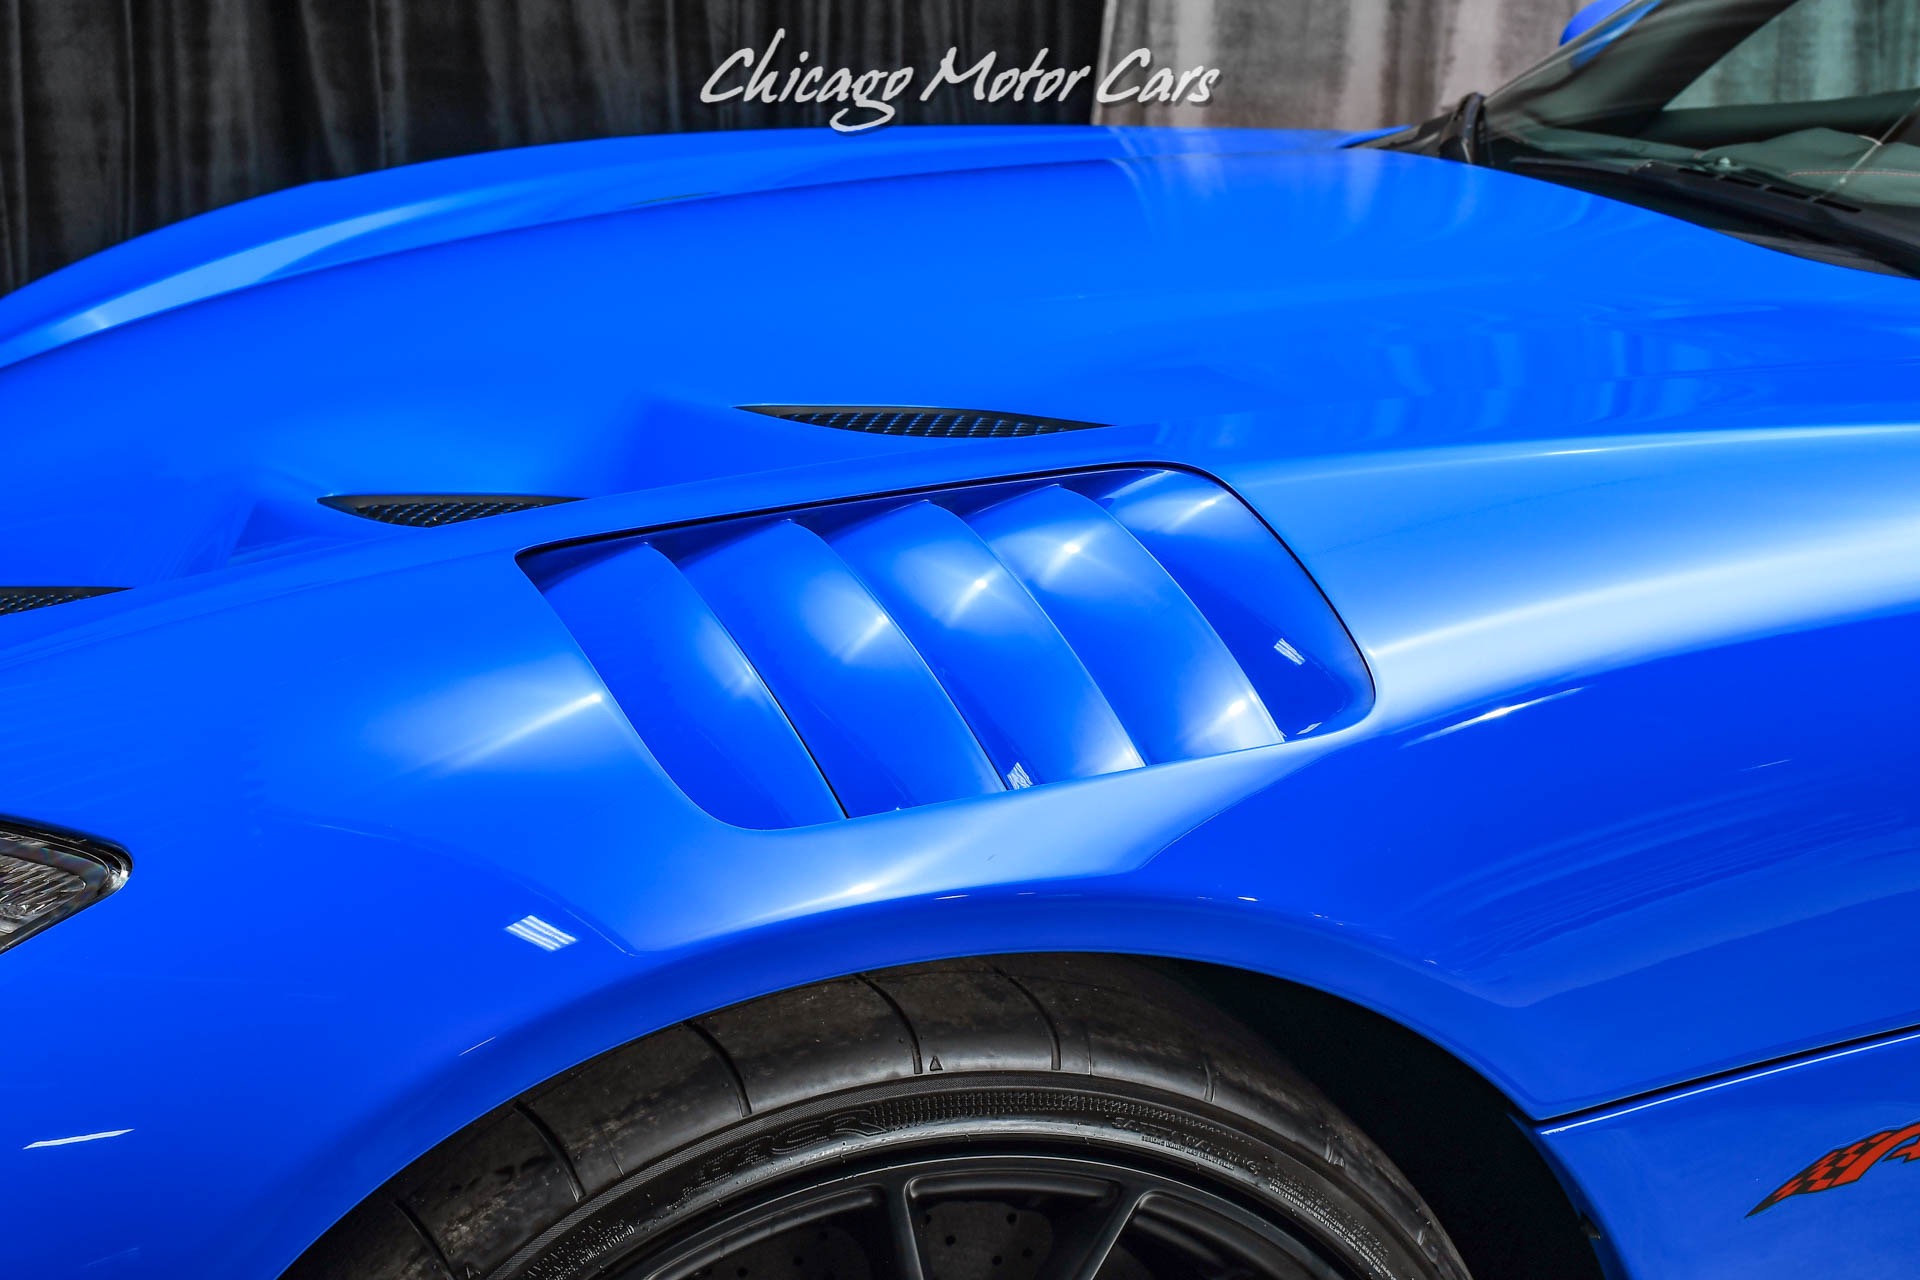 Used-2016-Dodge-Viper-ACR-Extreme-Aero-Package-ONLY-11-MILES-COMPETITION-BLUE